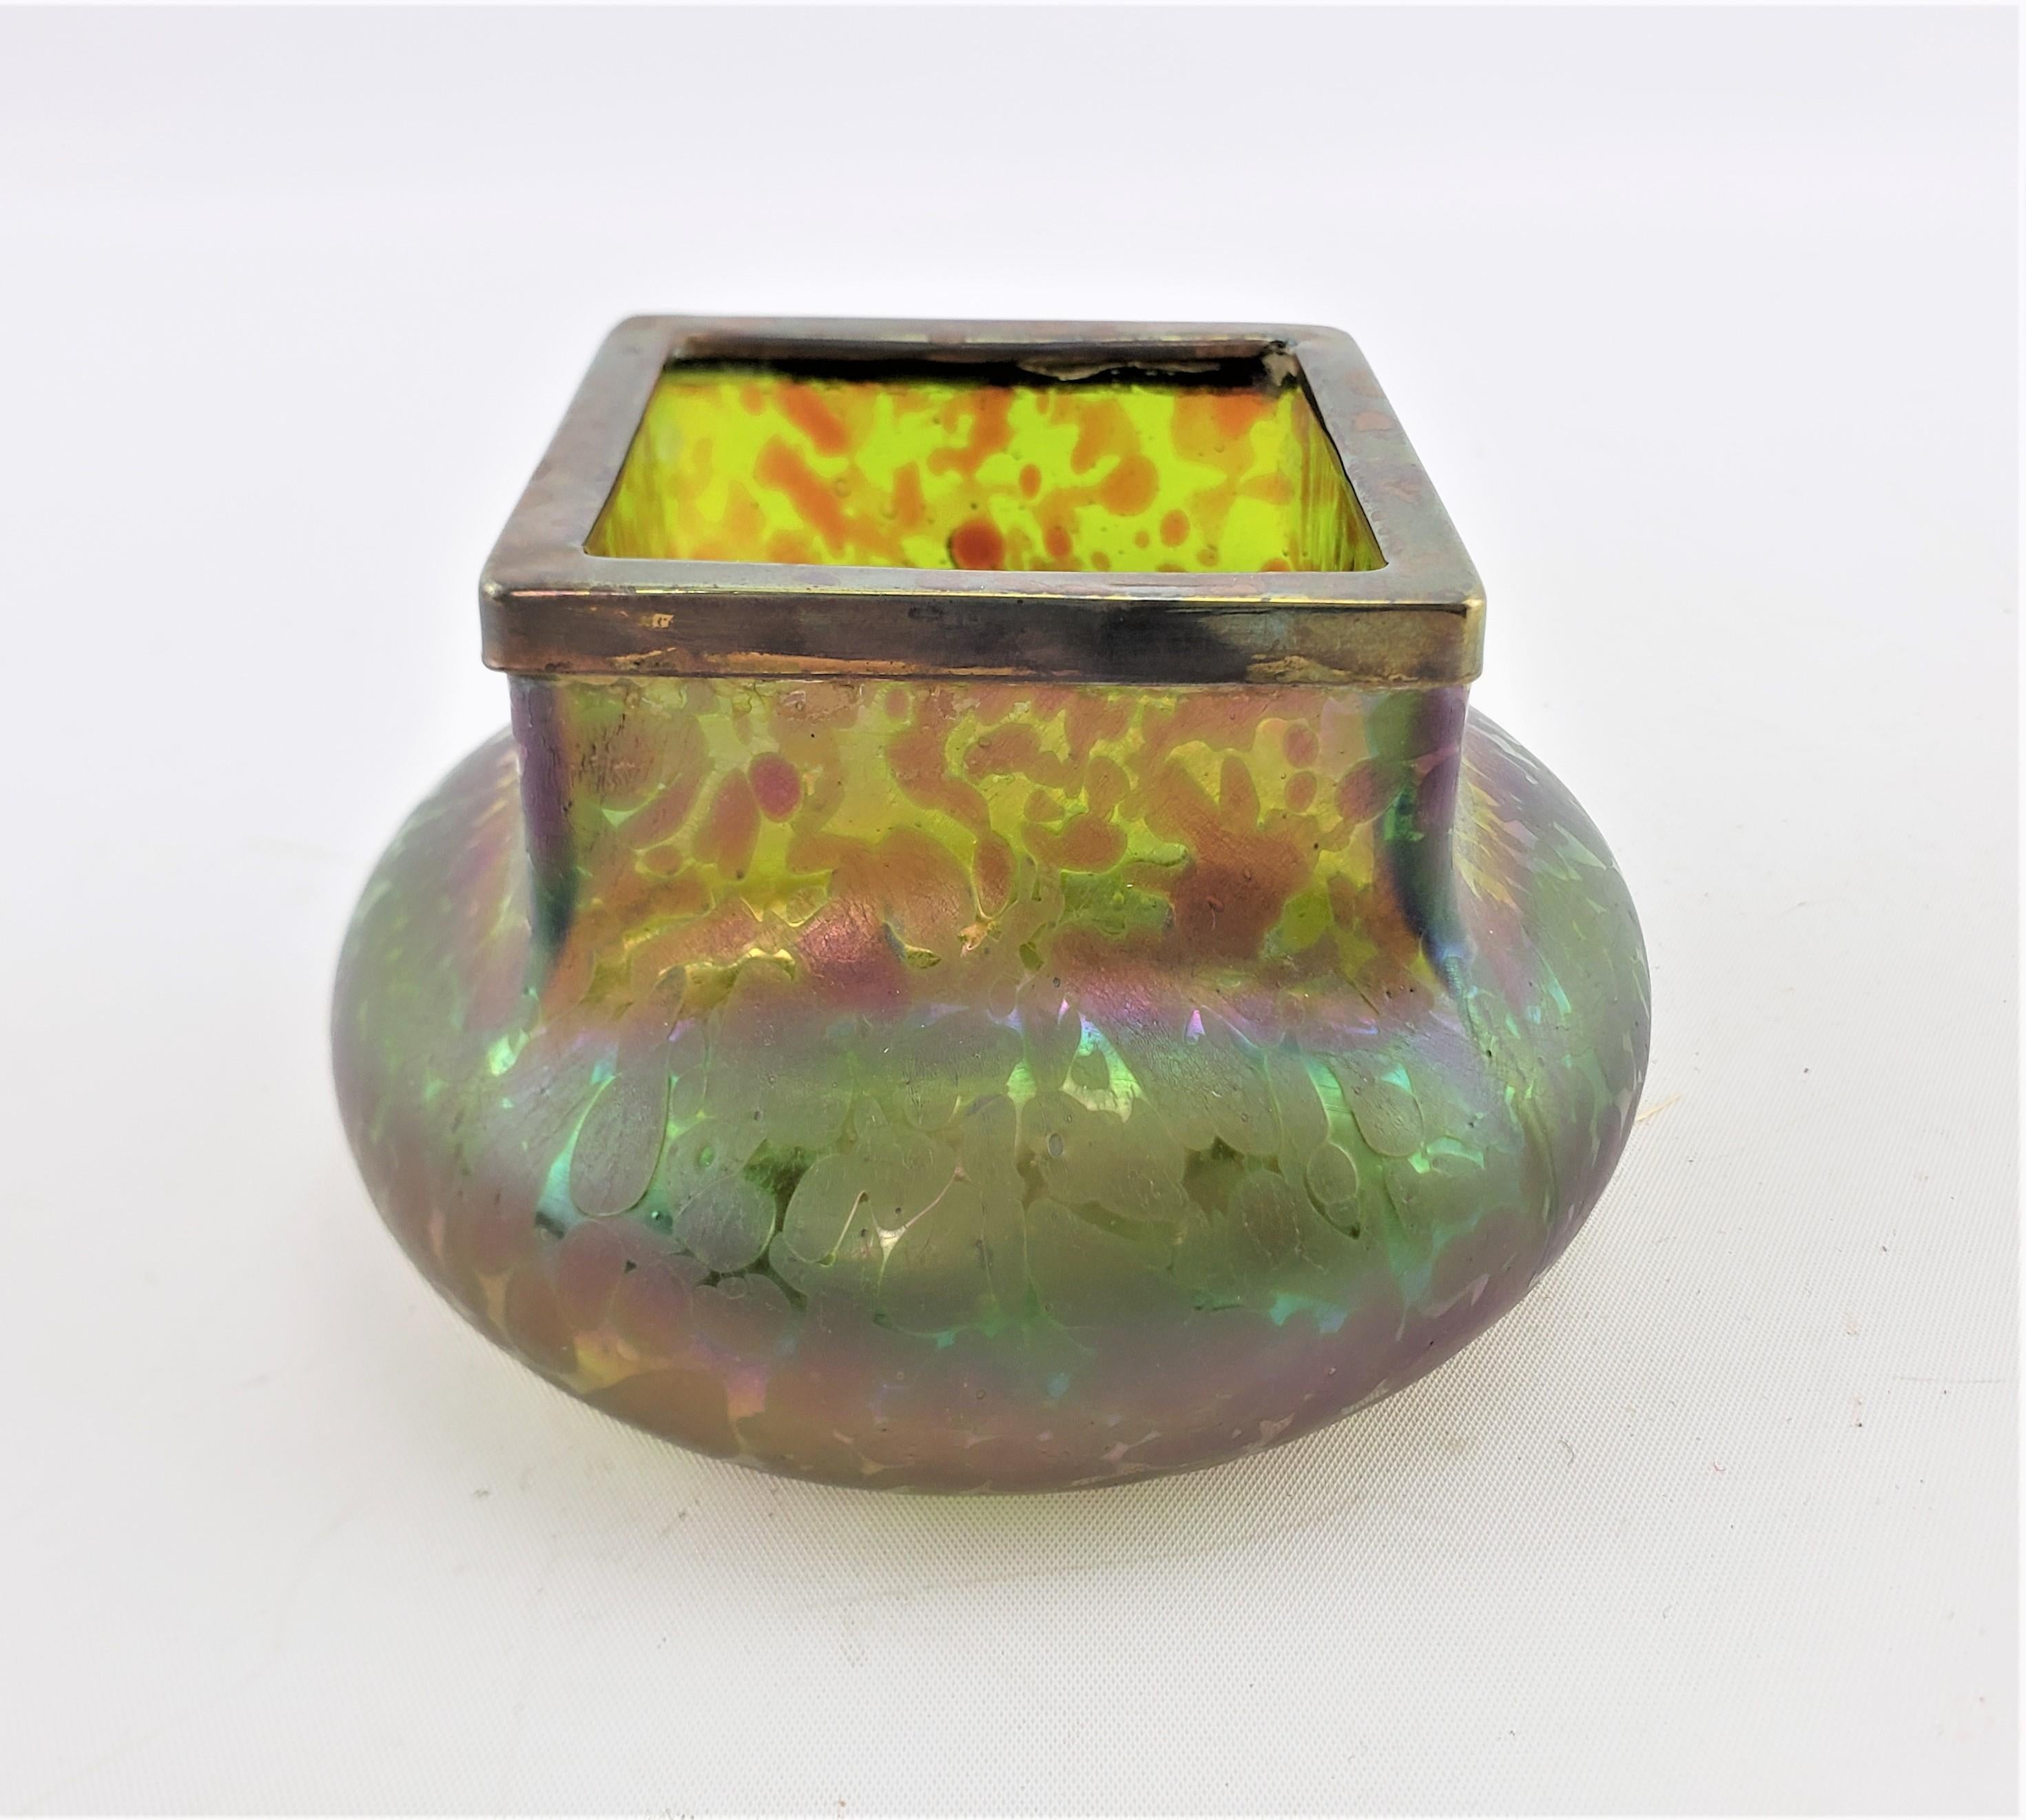 This antique art glass vase is unsigned, but presumed to have originated from Austria and dates to approximately 1900 and done in the period Art Nouveau style. The vase is done in multi colors with strong iridescence with a squared top and bulbous